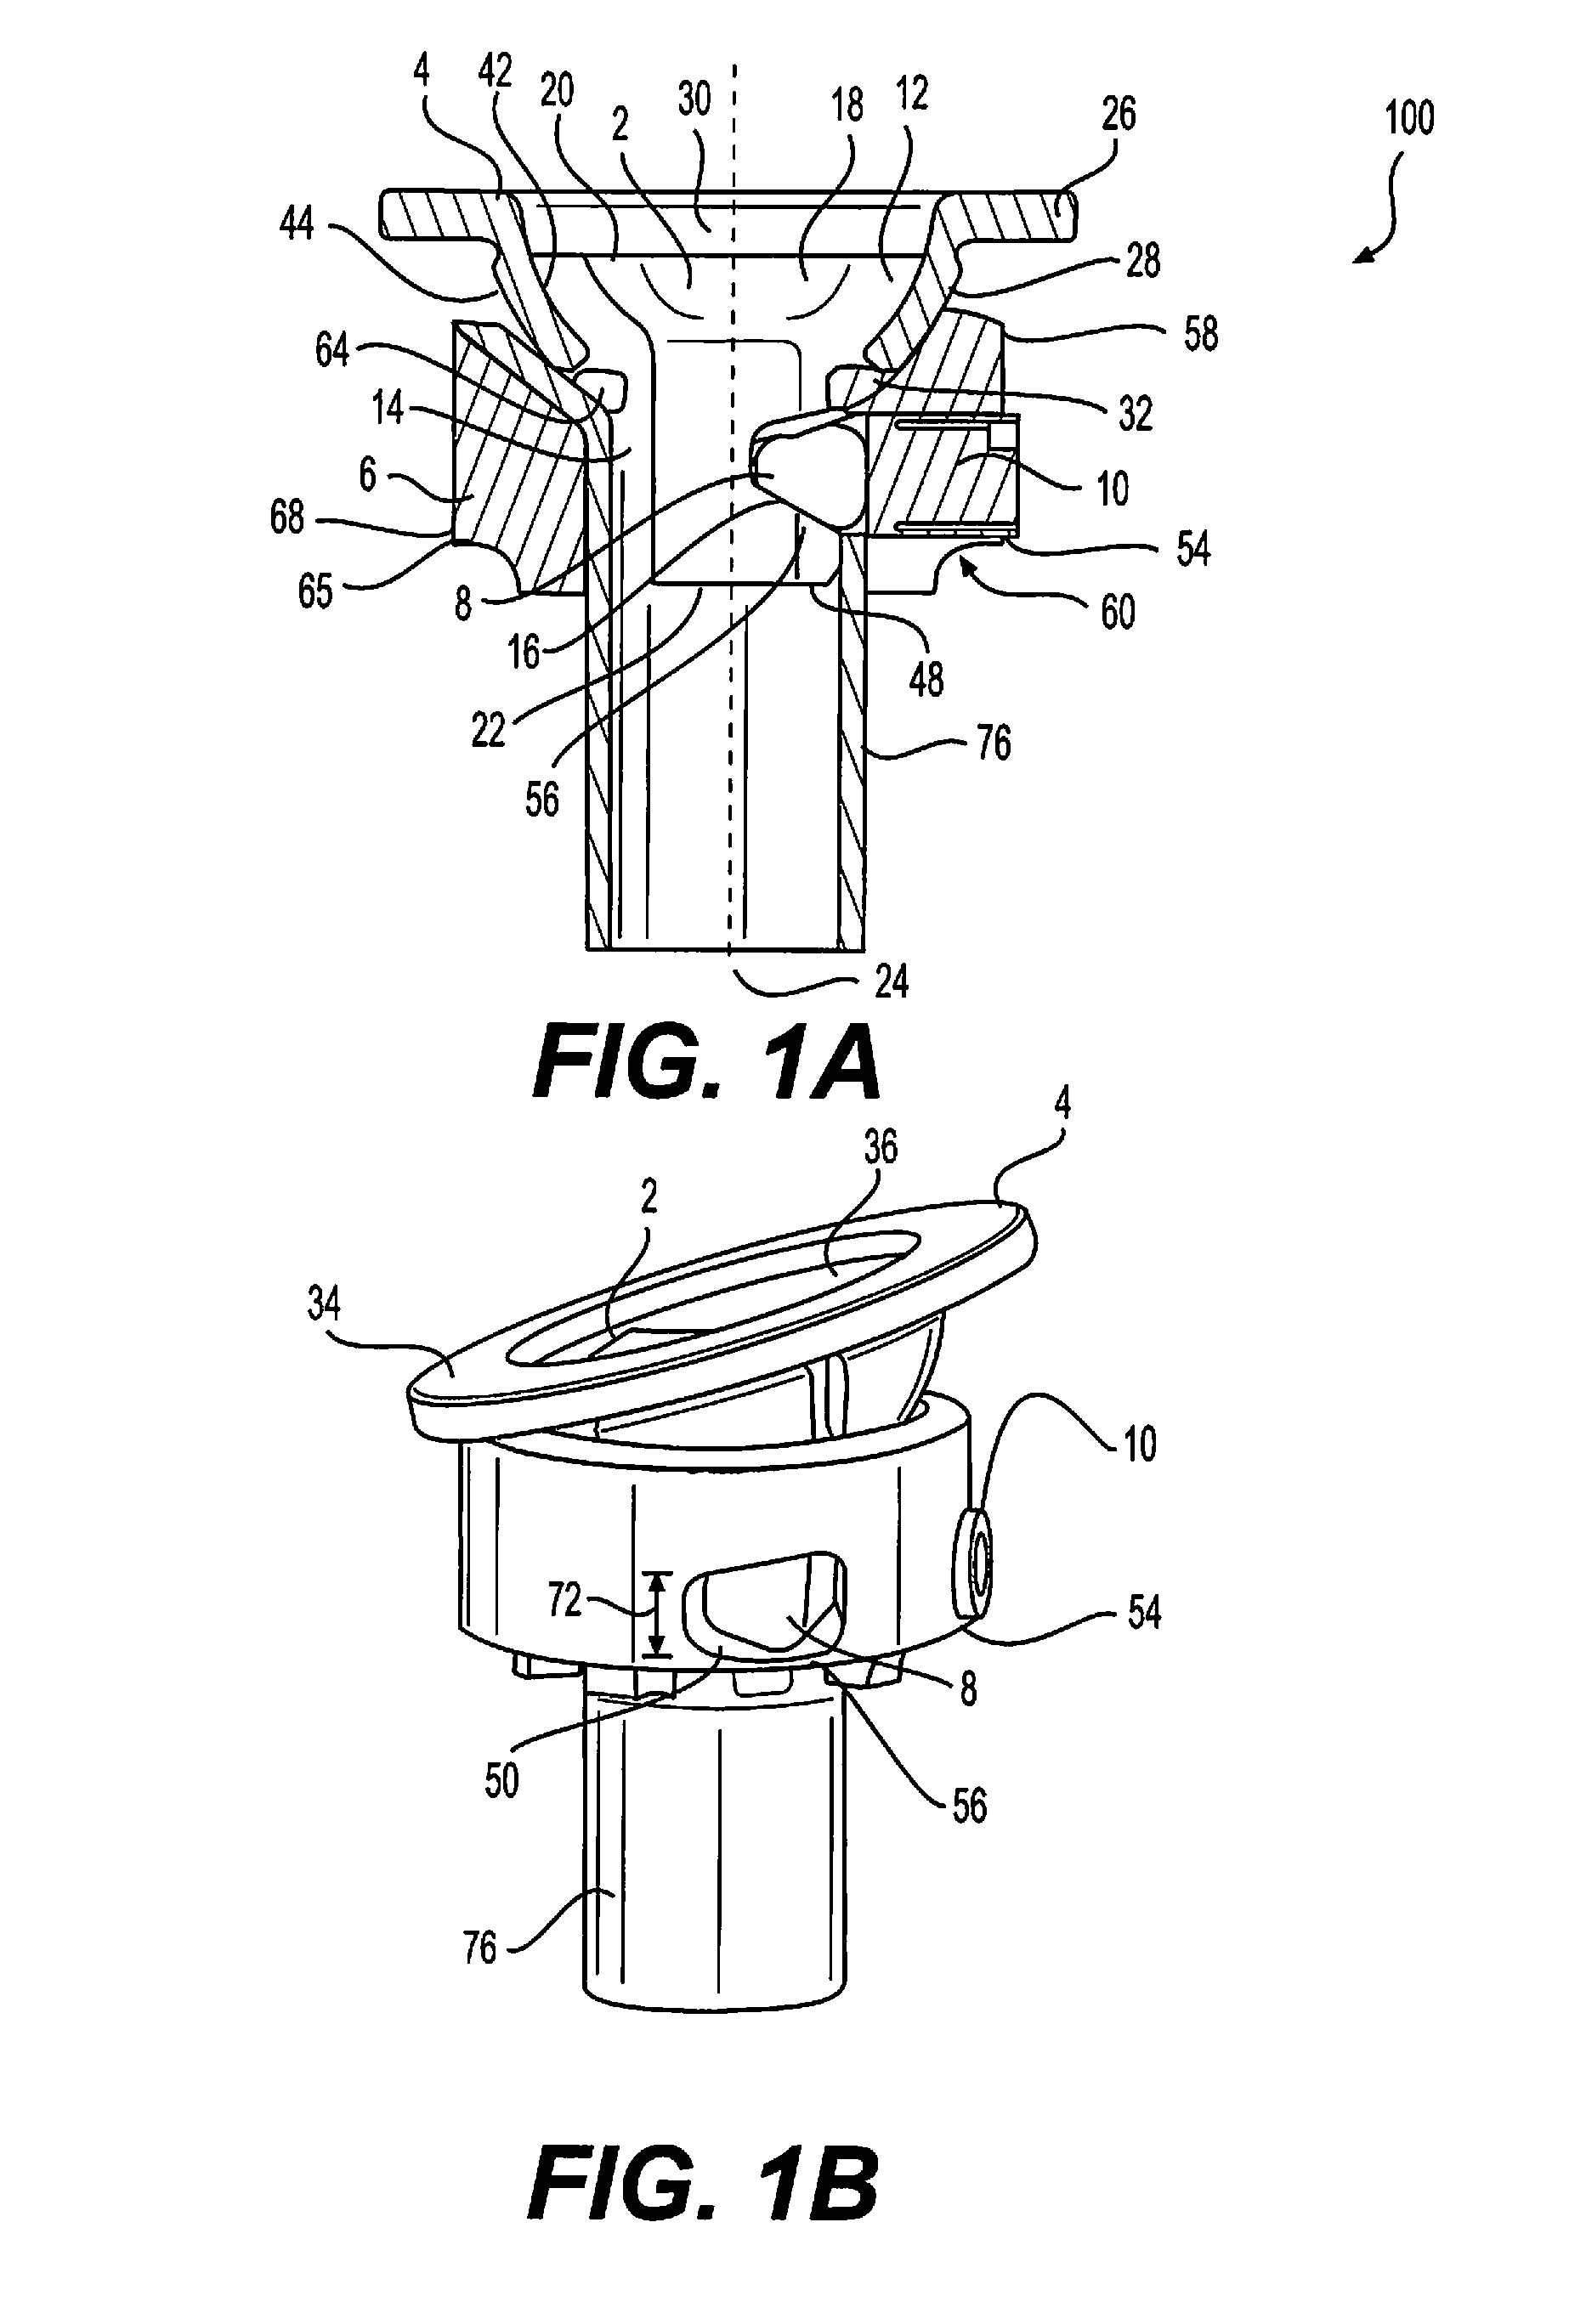 Vertebral implants and methods for installation thereof